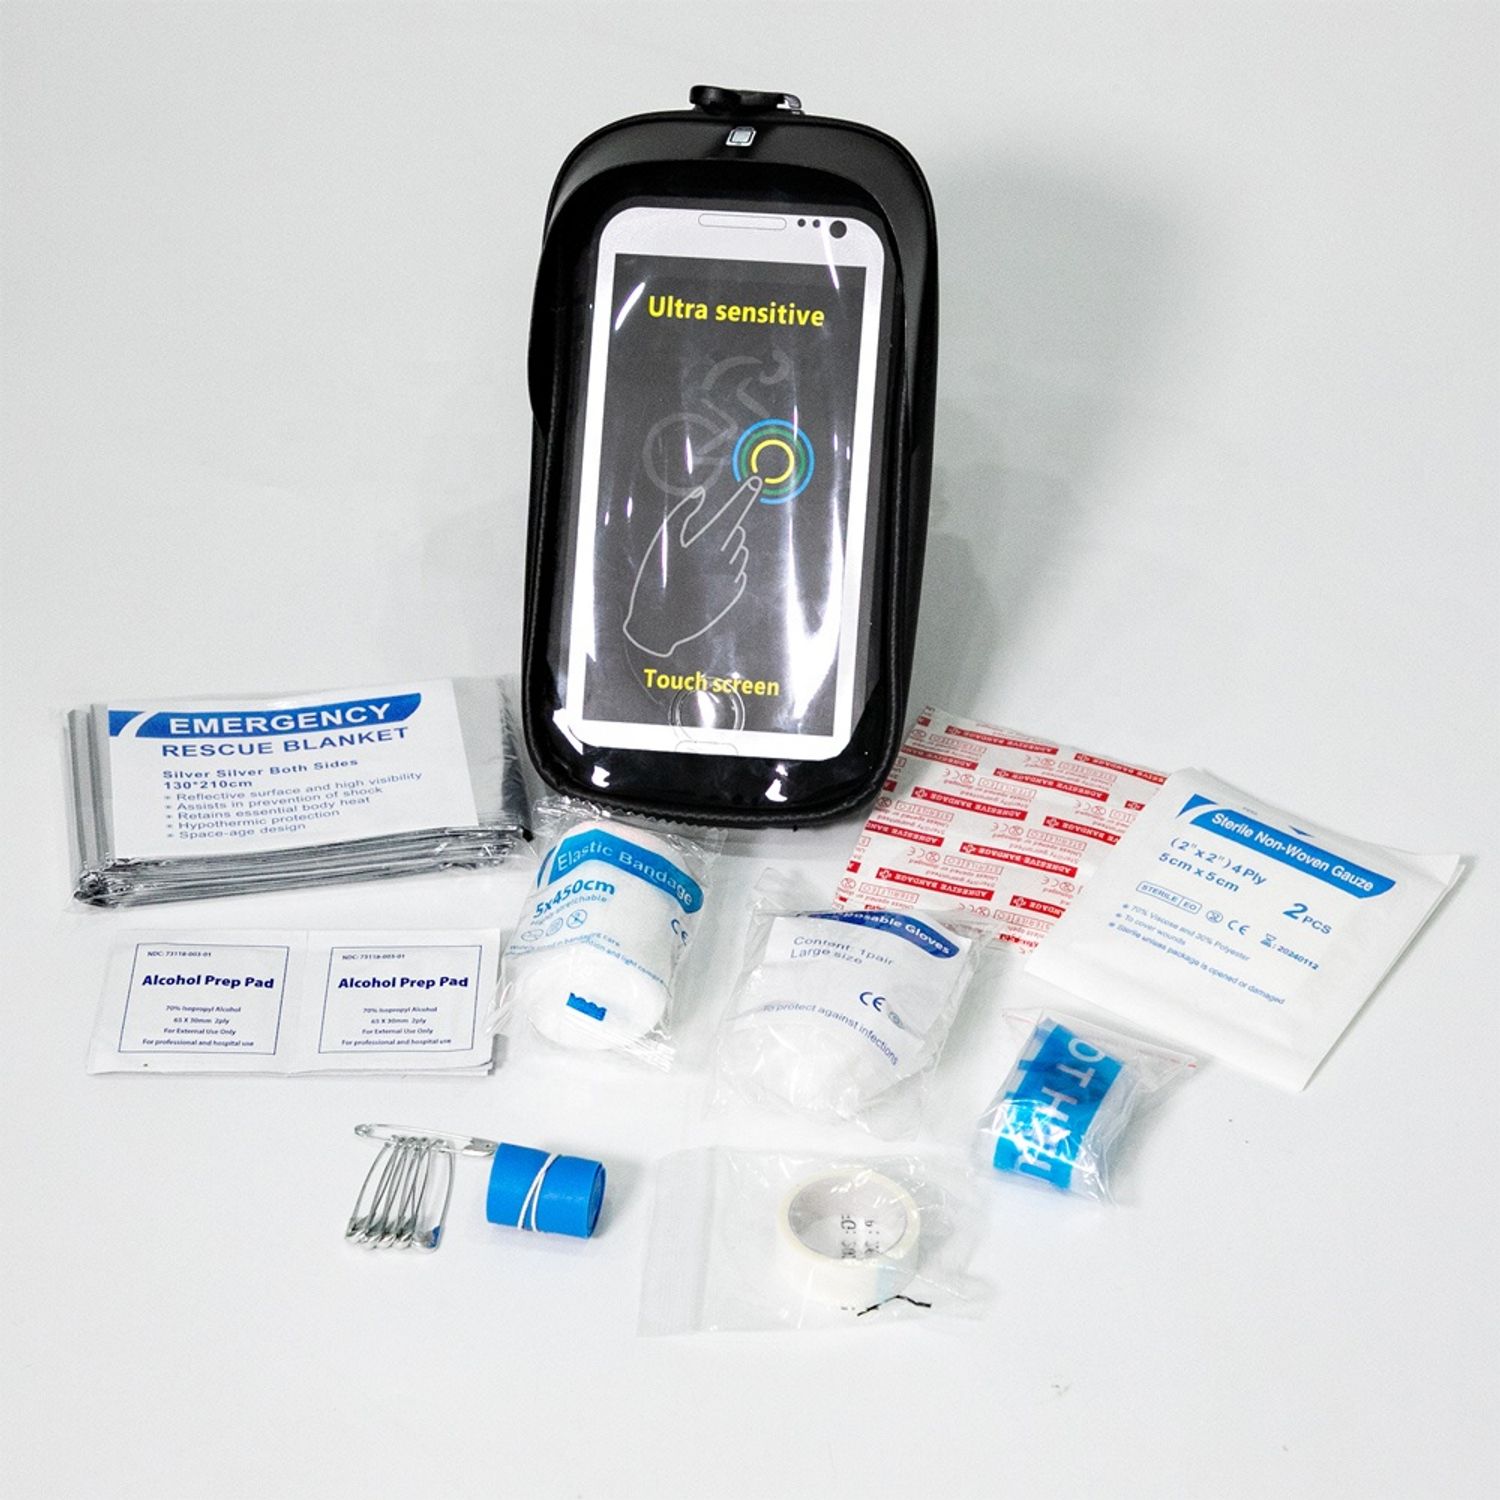 show of Our Mountain Bike Emergency Kit-42PCS First Aid Essentials for Cycling Adventures